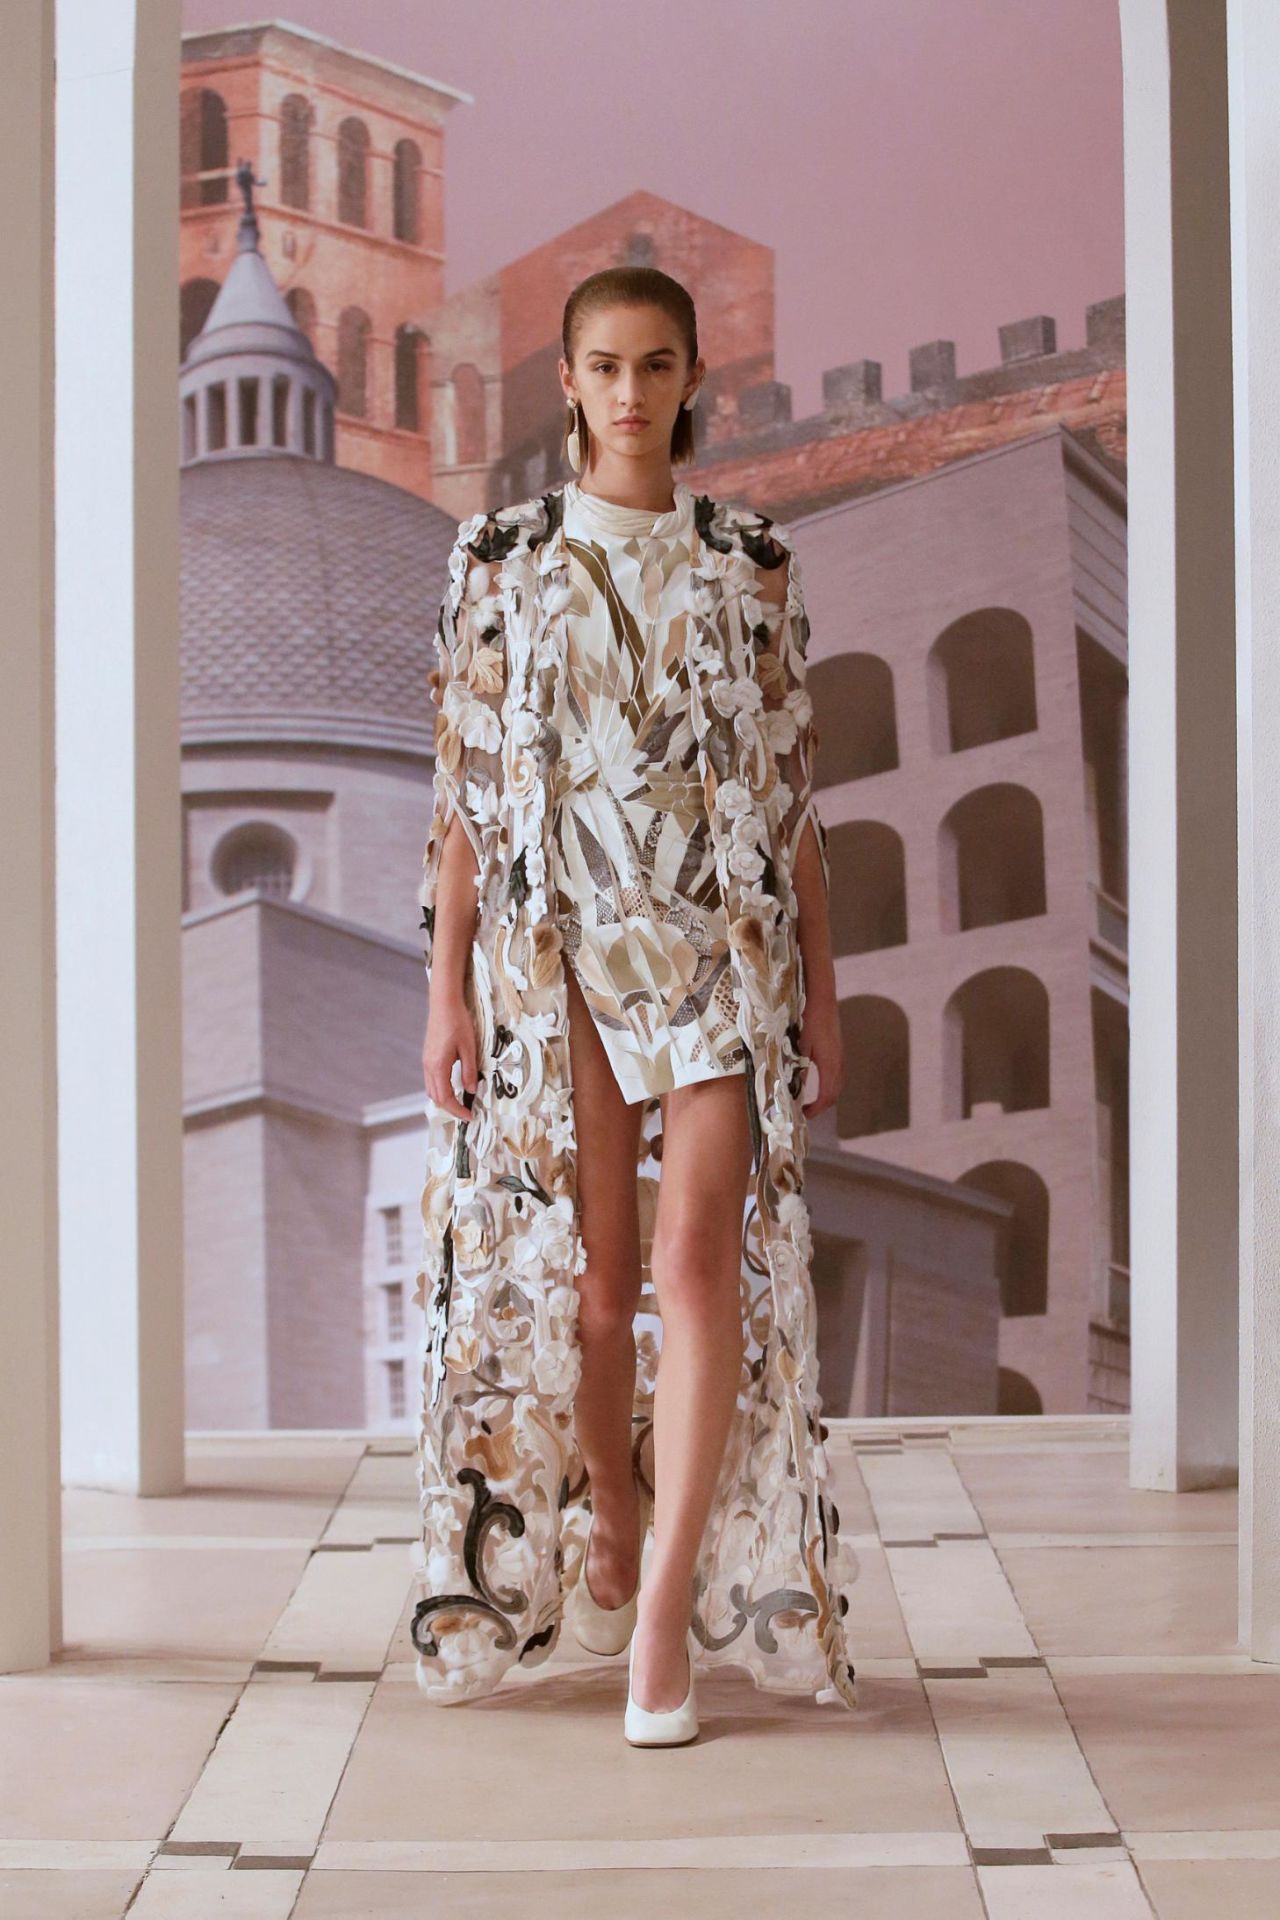 Ancient Rome was a wellspring of inspiration for creative director Kim Jones.